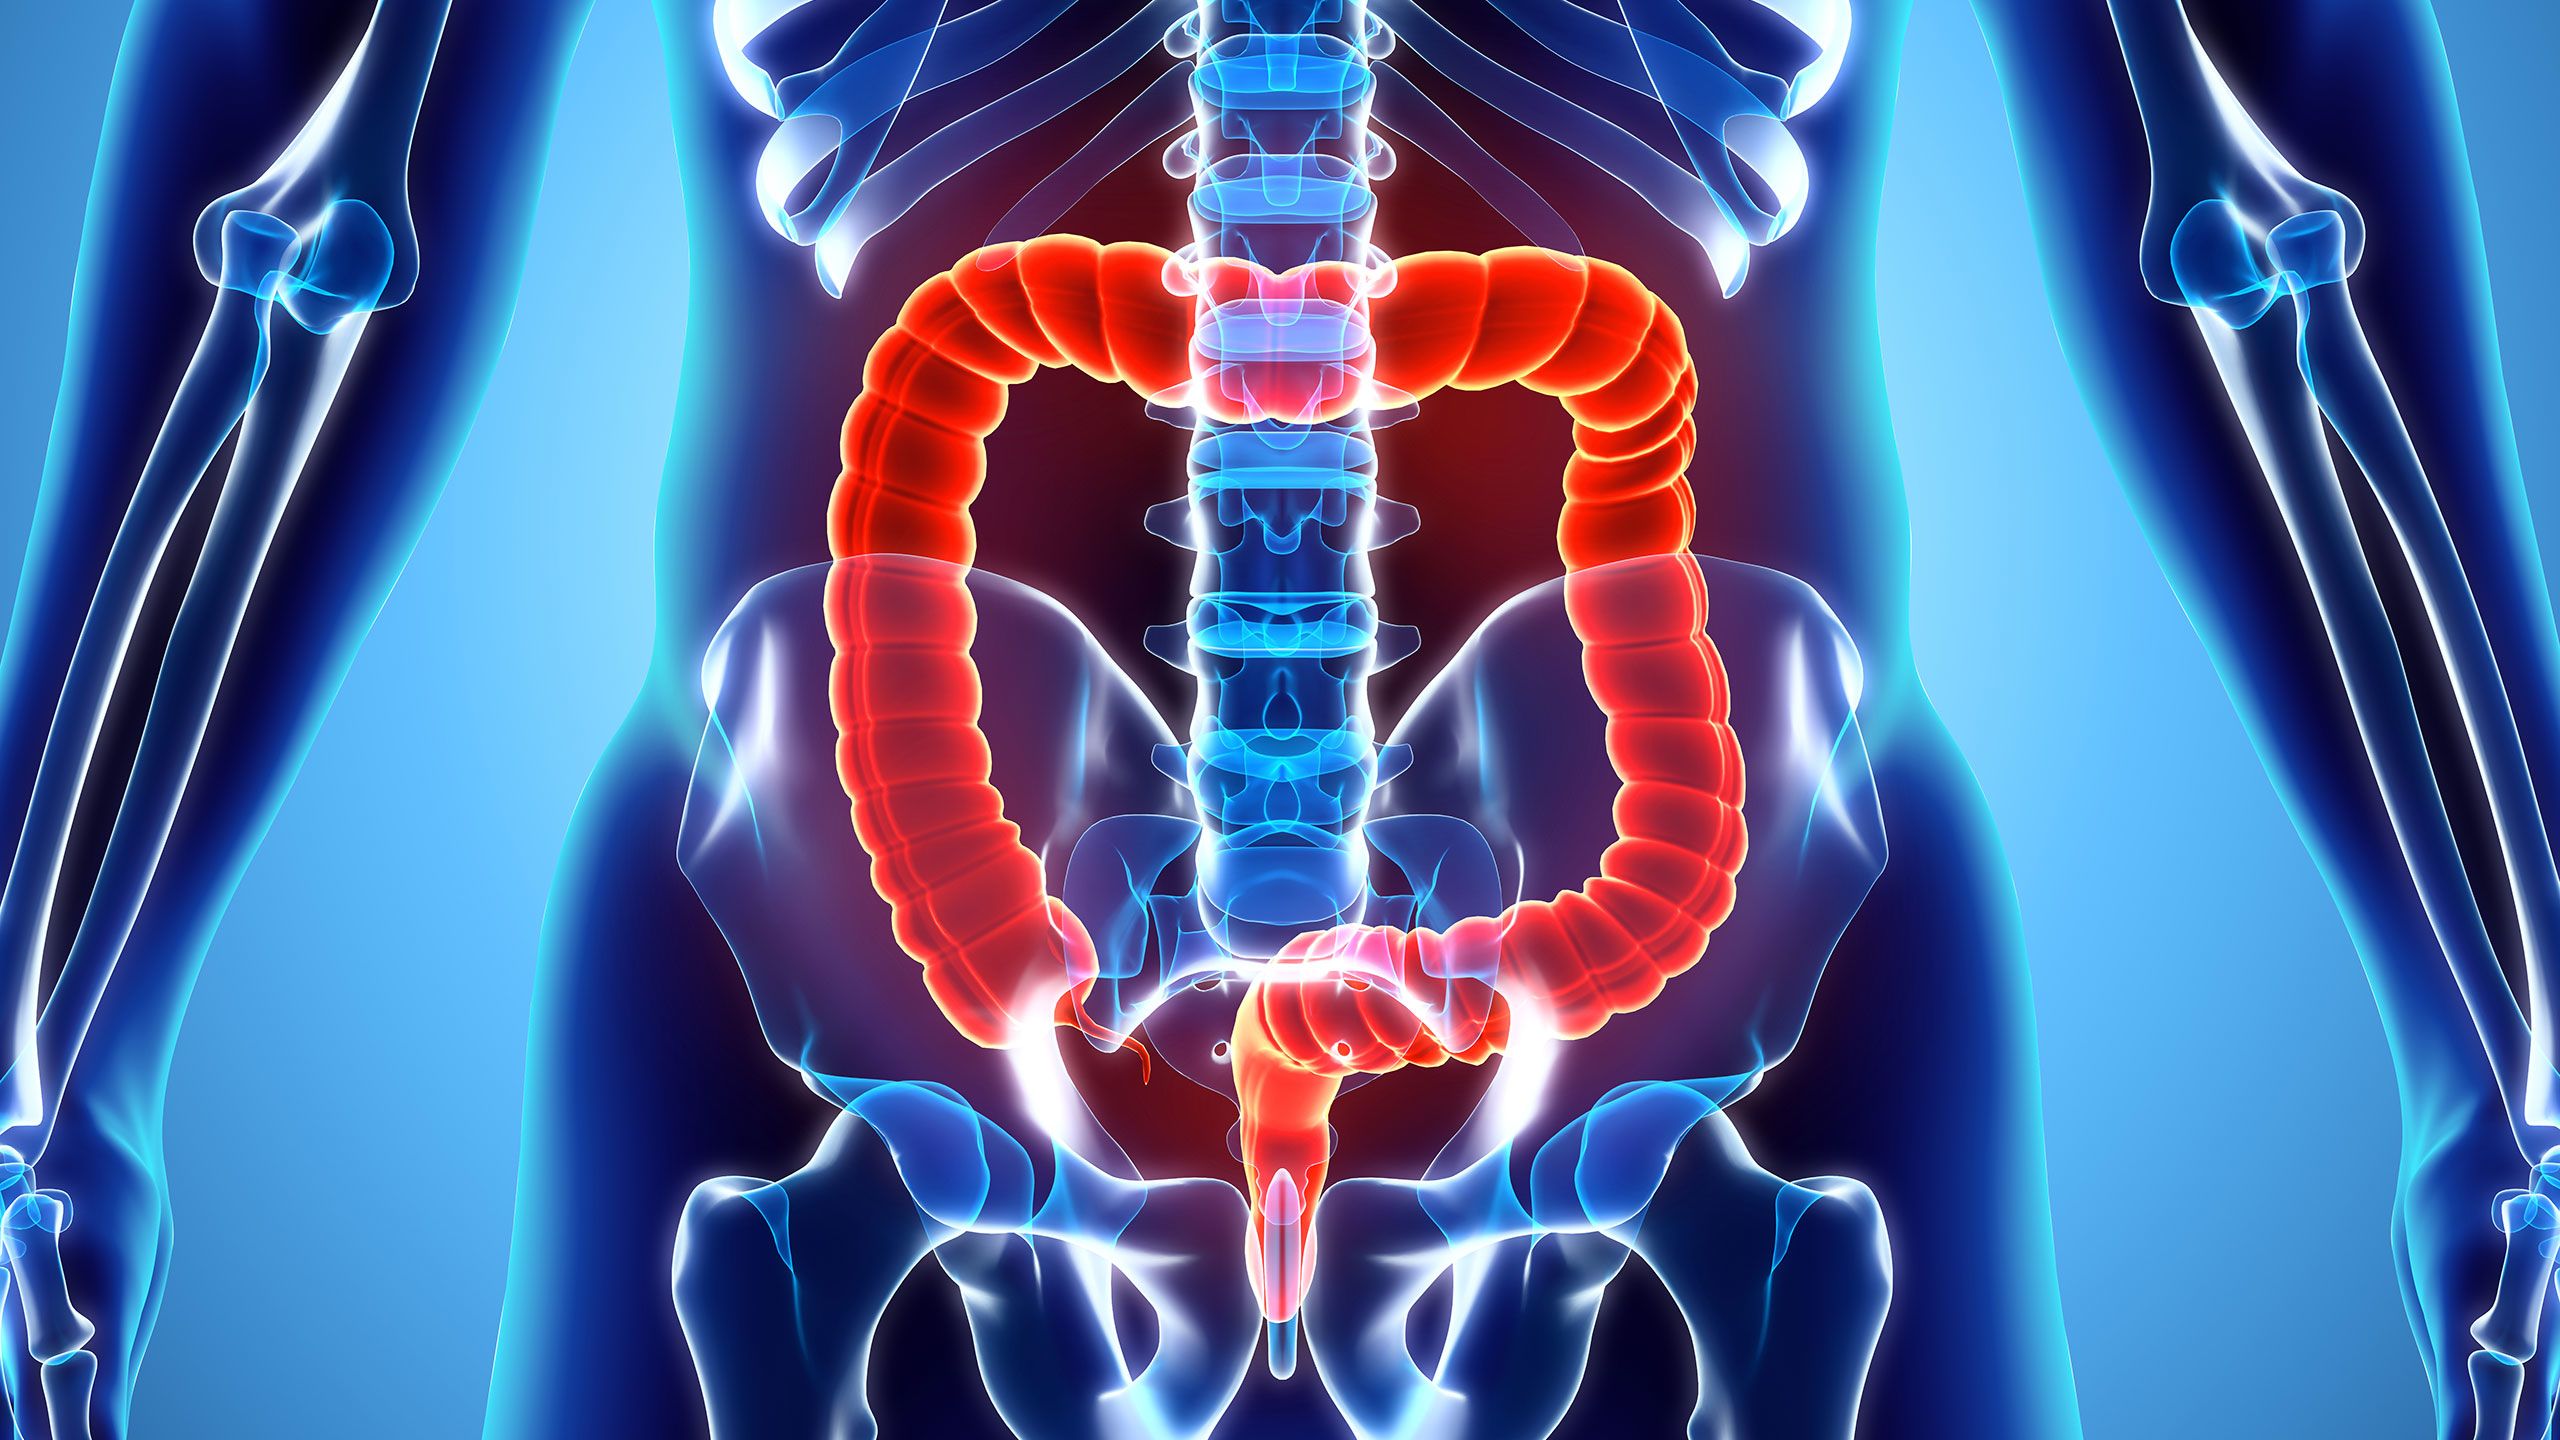 colon rectum cancer life expectancy and prognosis